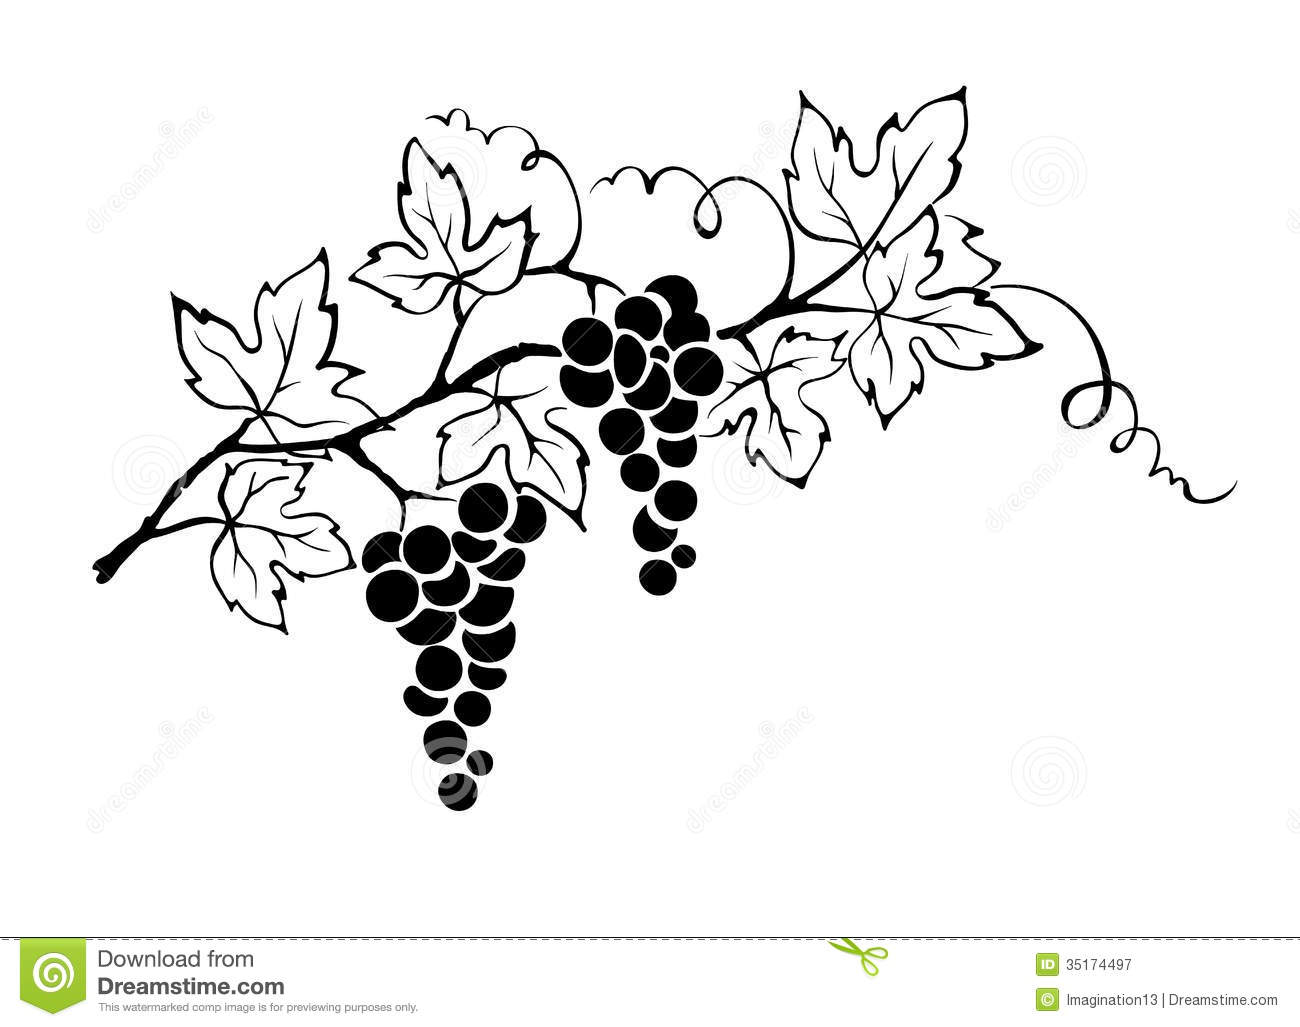 1000 images about Grape Art o